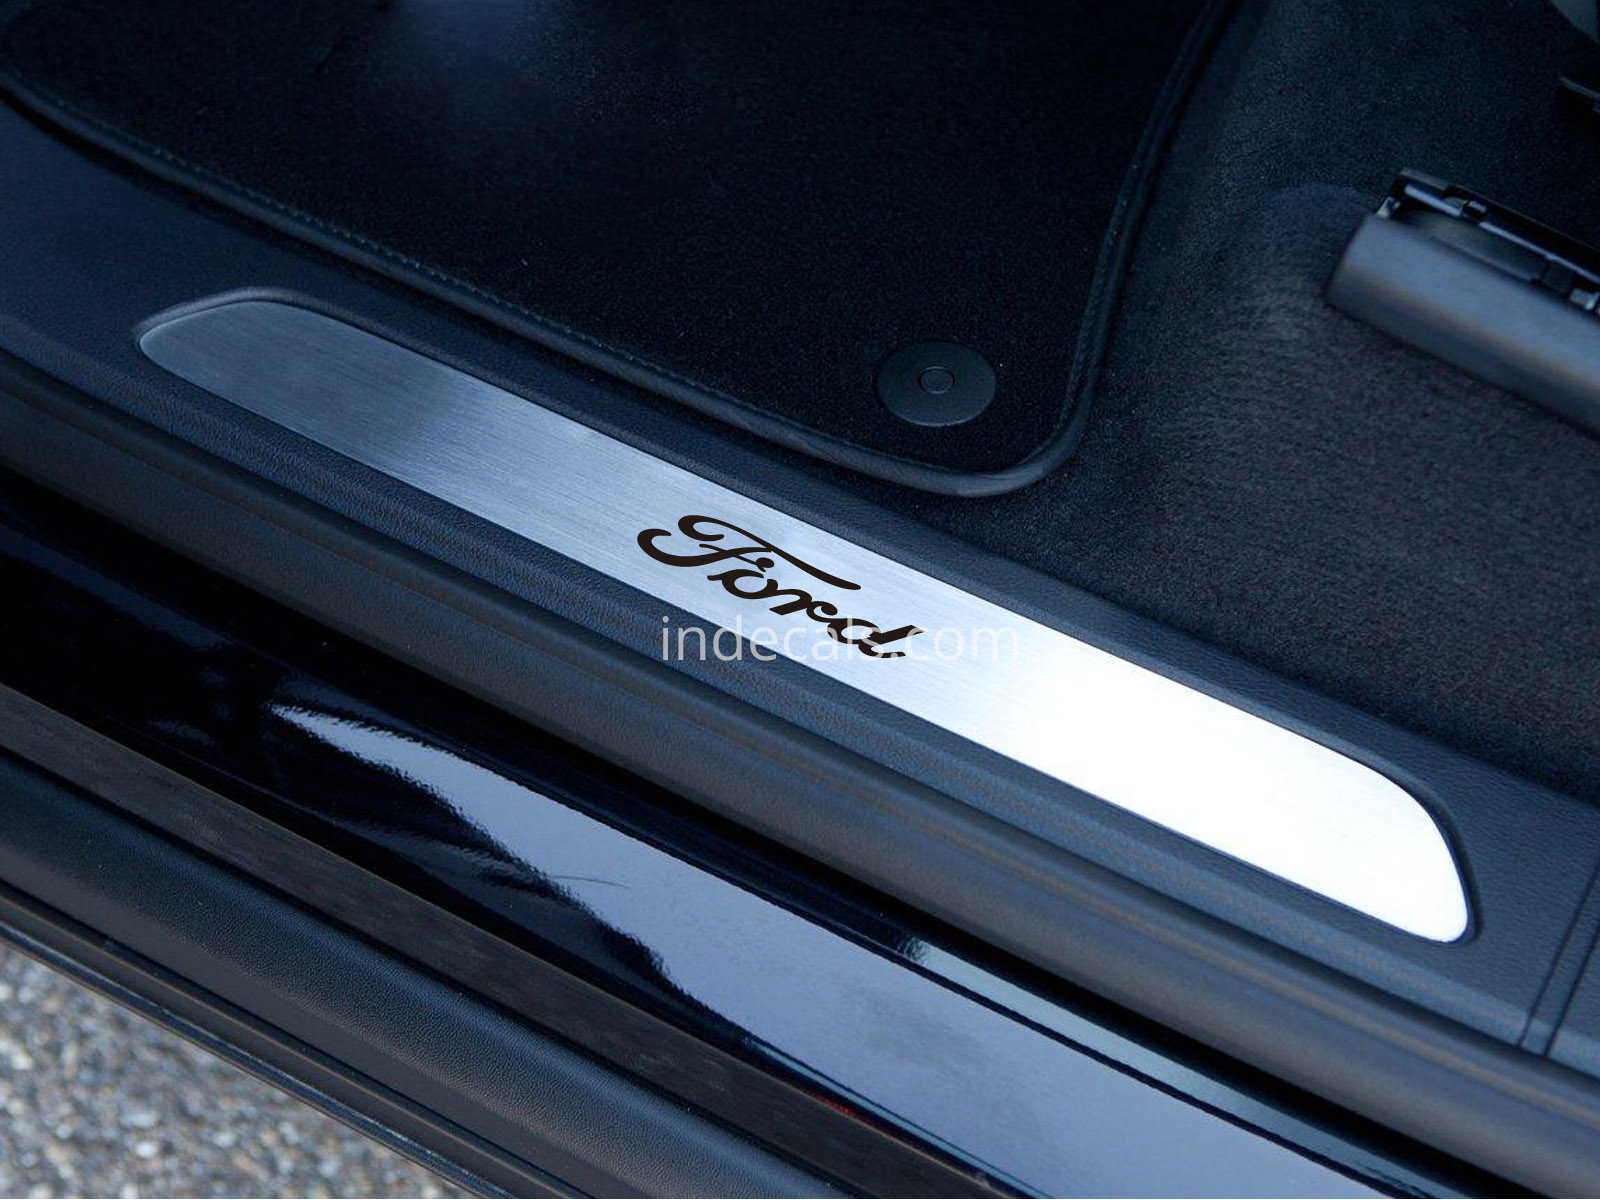 6 x Ford Stickers for Door Sills - Black